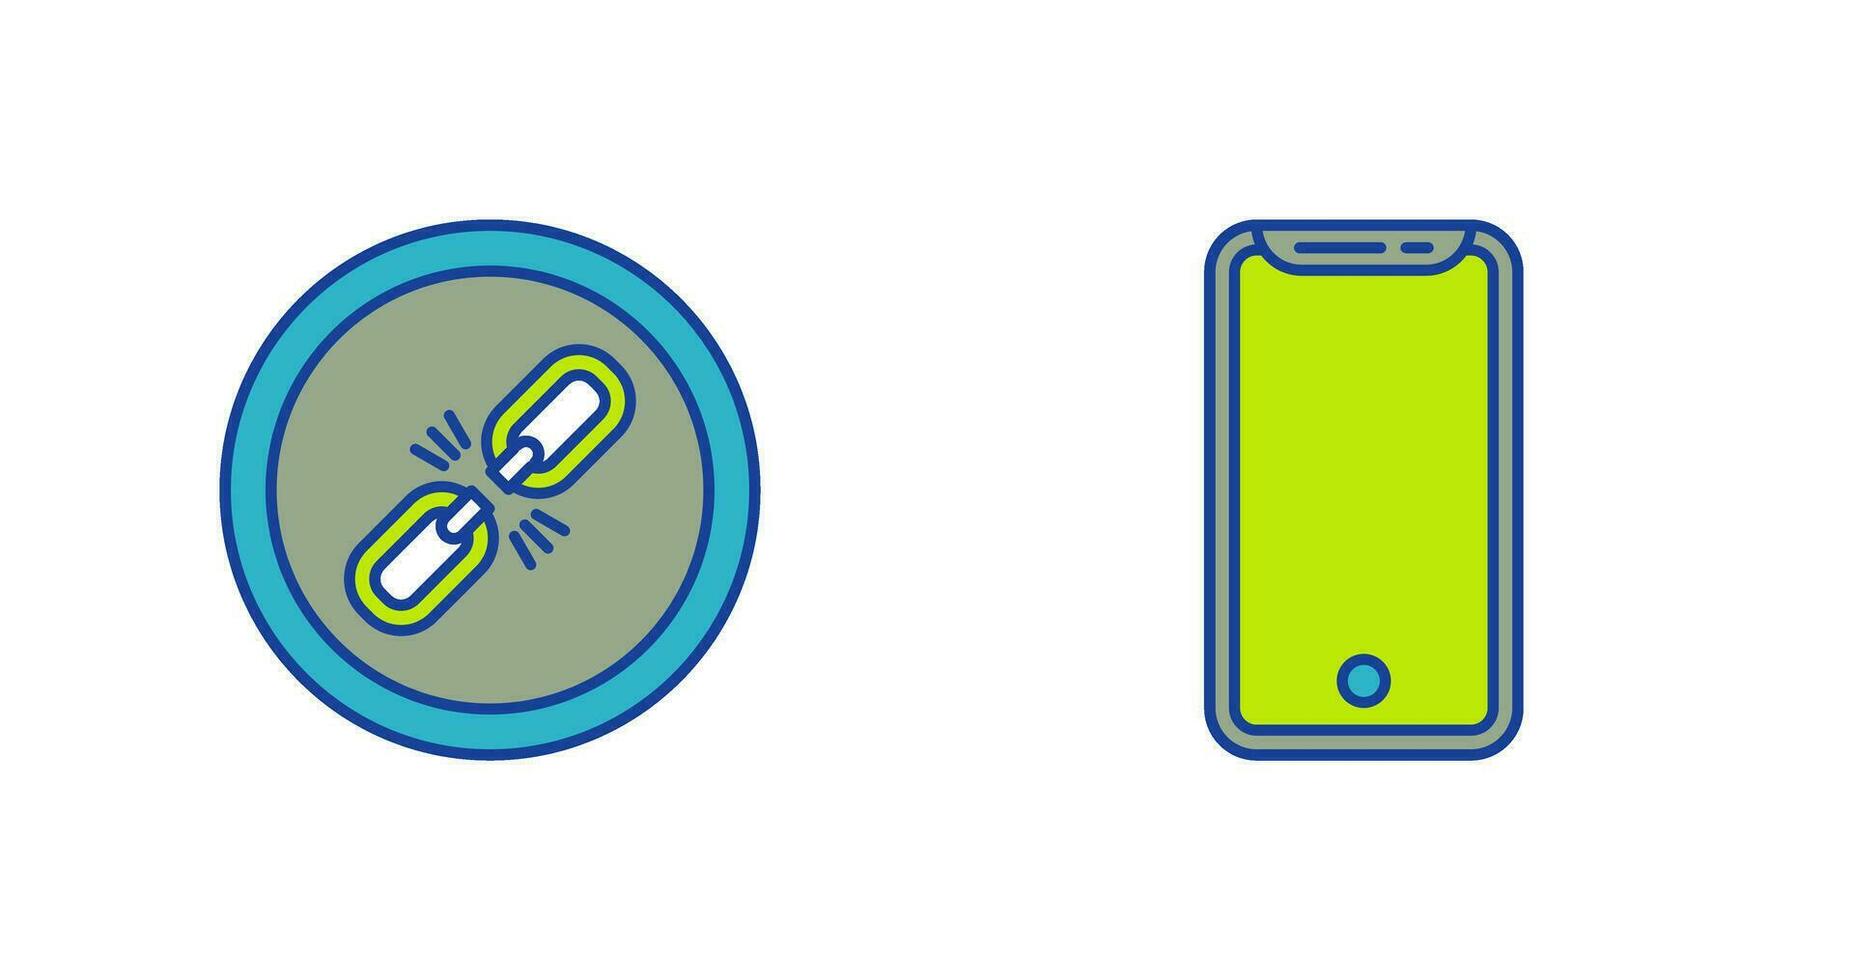 Link and Smartphone Icon vector